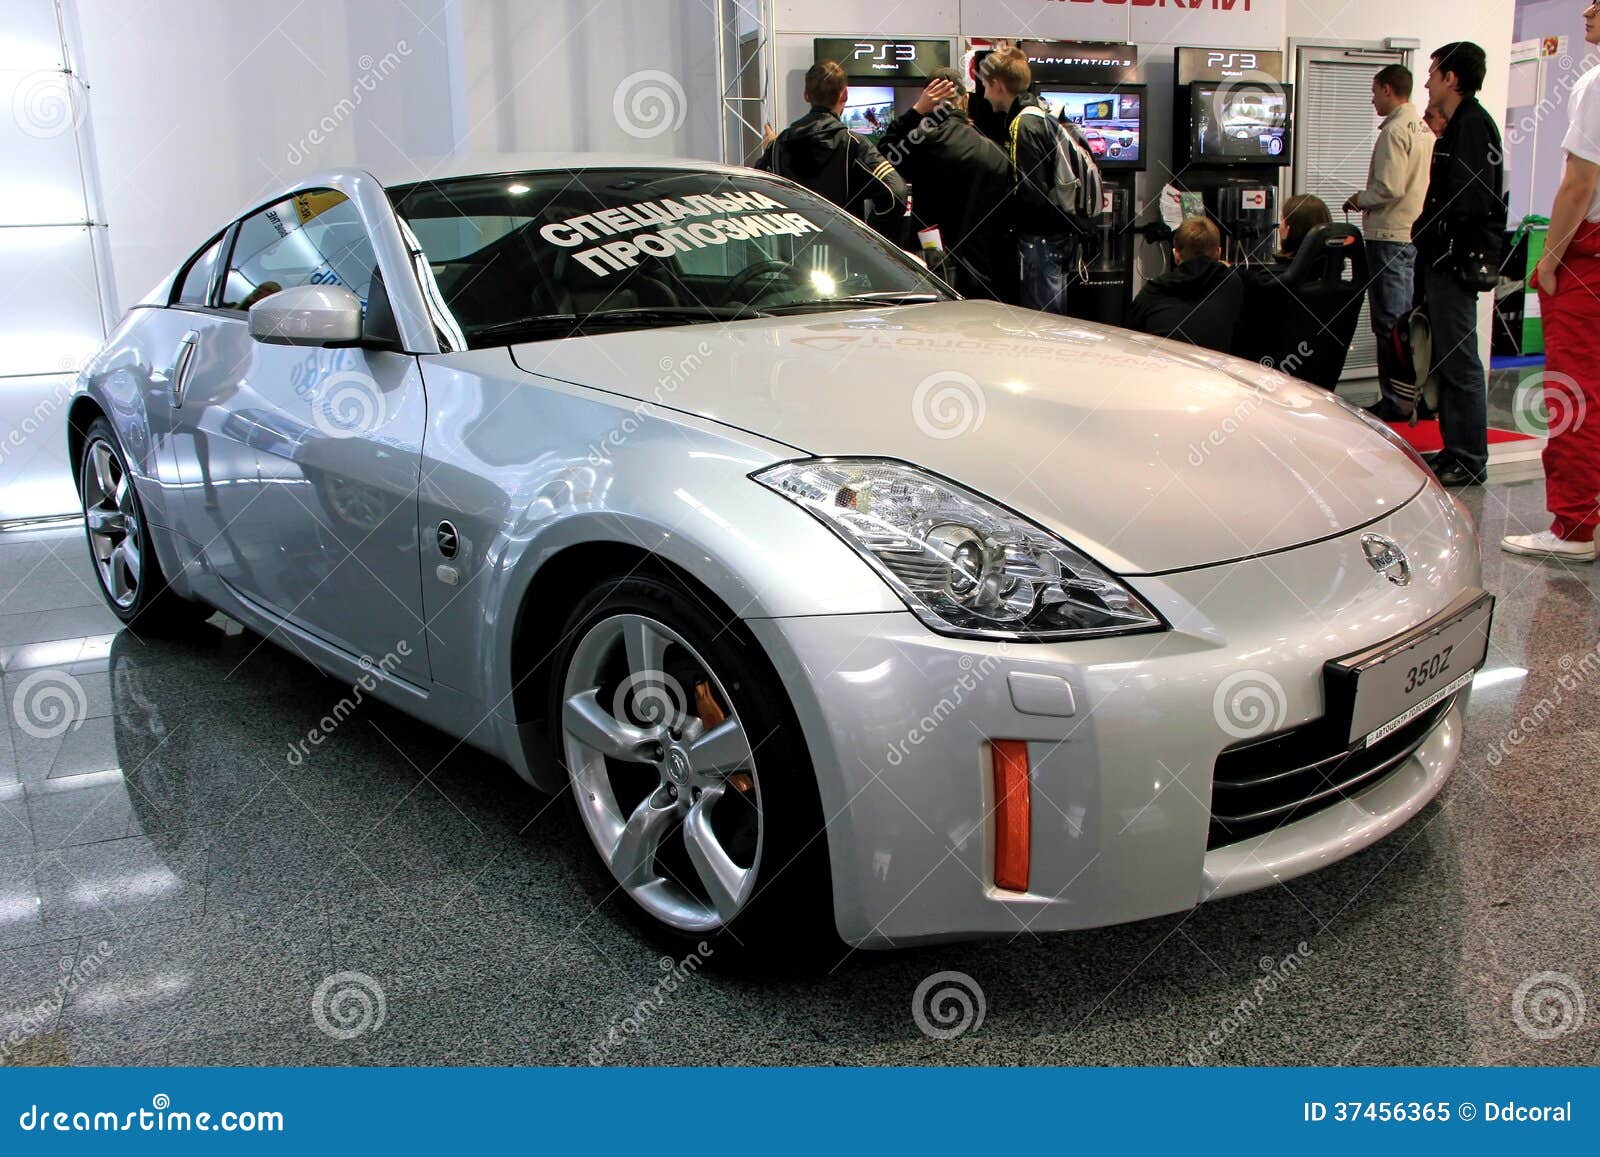 Japanese Tuning Sports Car Nissan 350Z Editorial Image - Image of